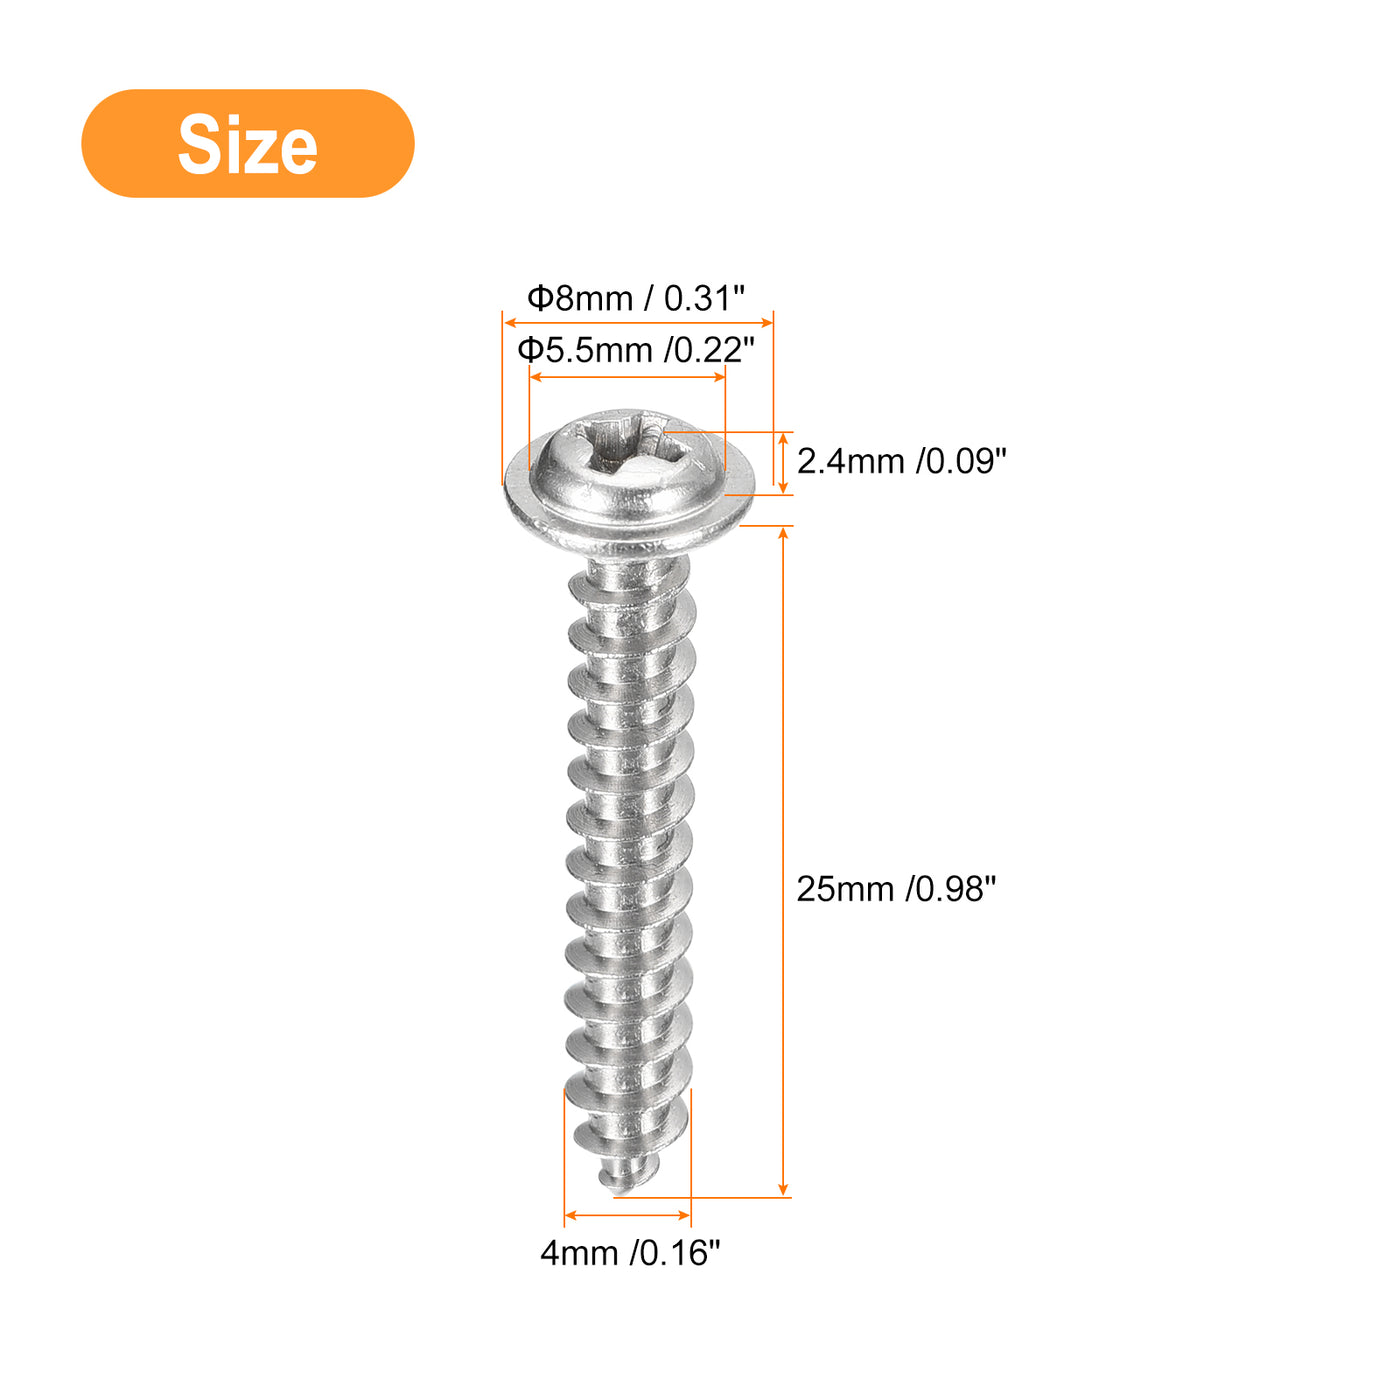 uxcell Uxcell ST4x25mm Phillips Pan Head Self-tapping Screw with Washer, 100pcs - 304 Stainless Steel Wood Screw Full Thread (Silver)